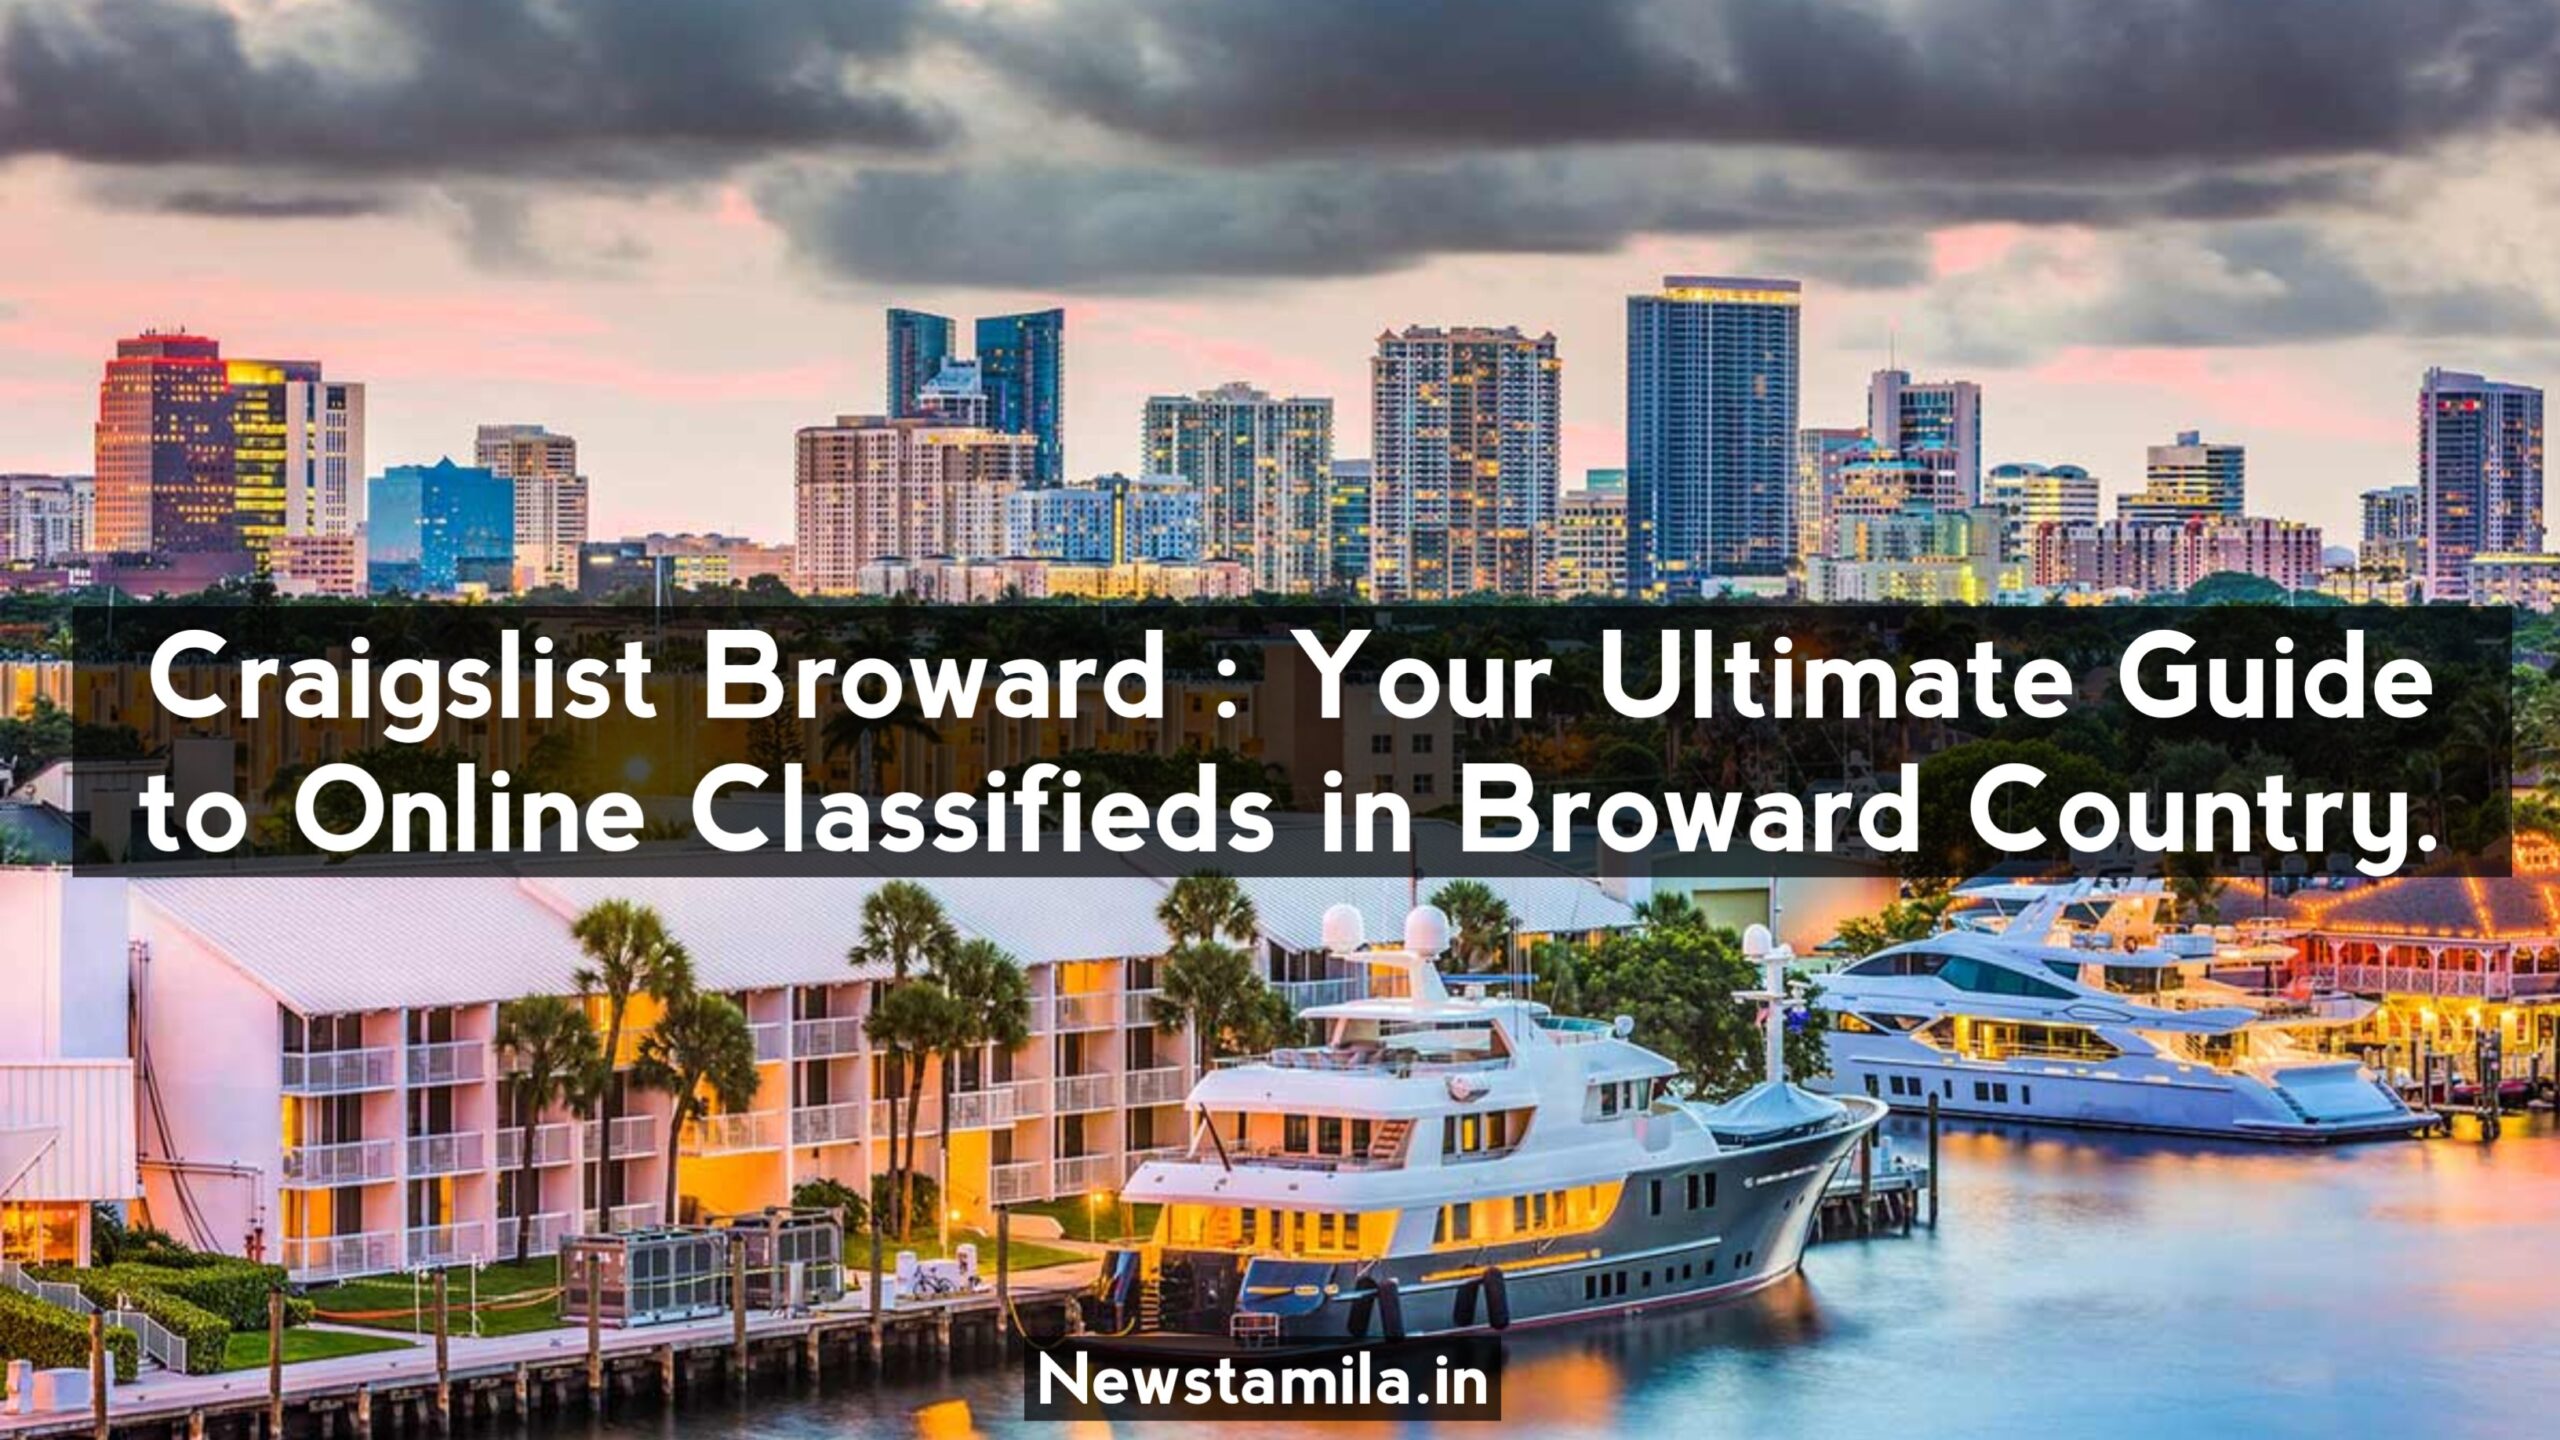 Craigslist Broward: Your Ultimate Guide to Online Classifieds in Broward County